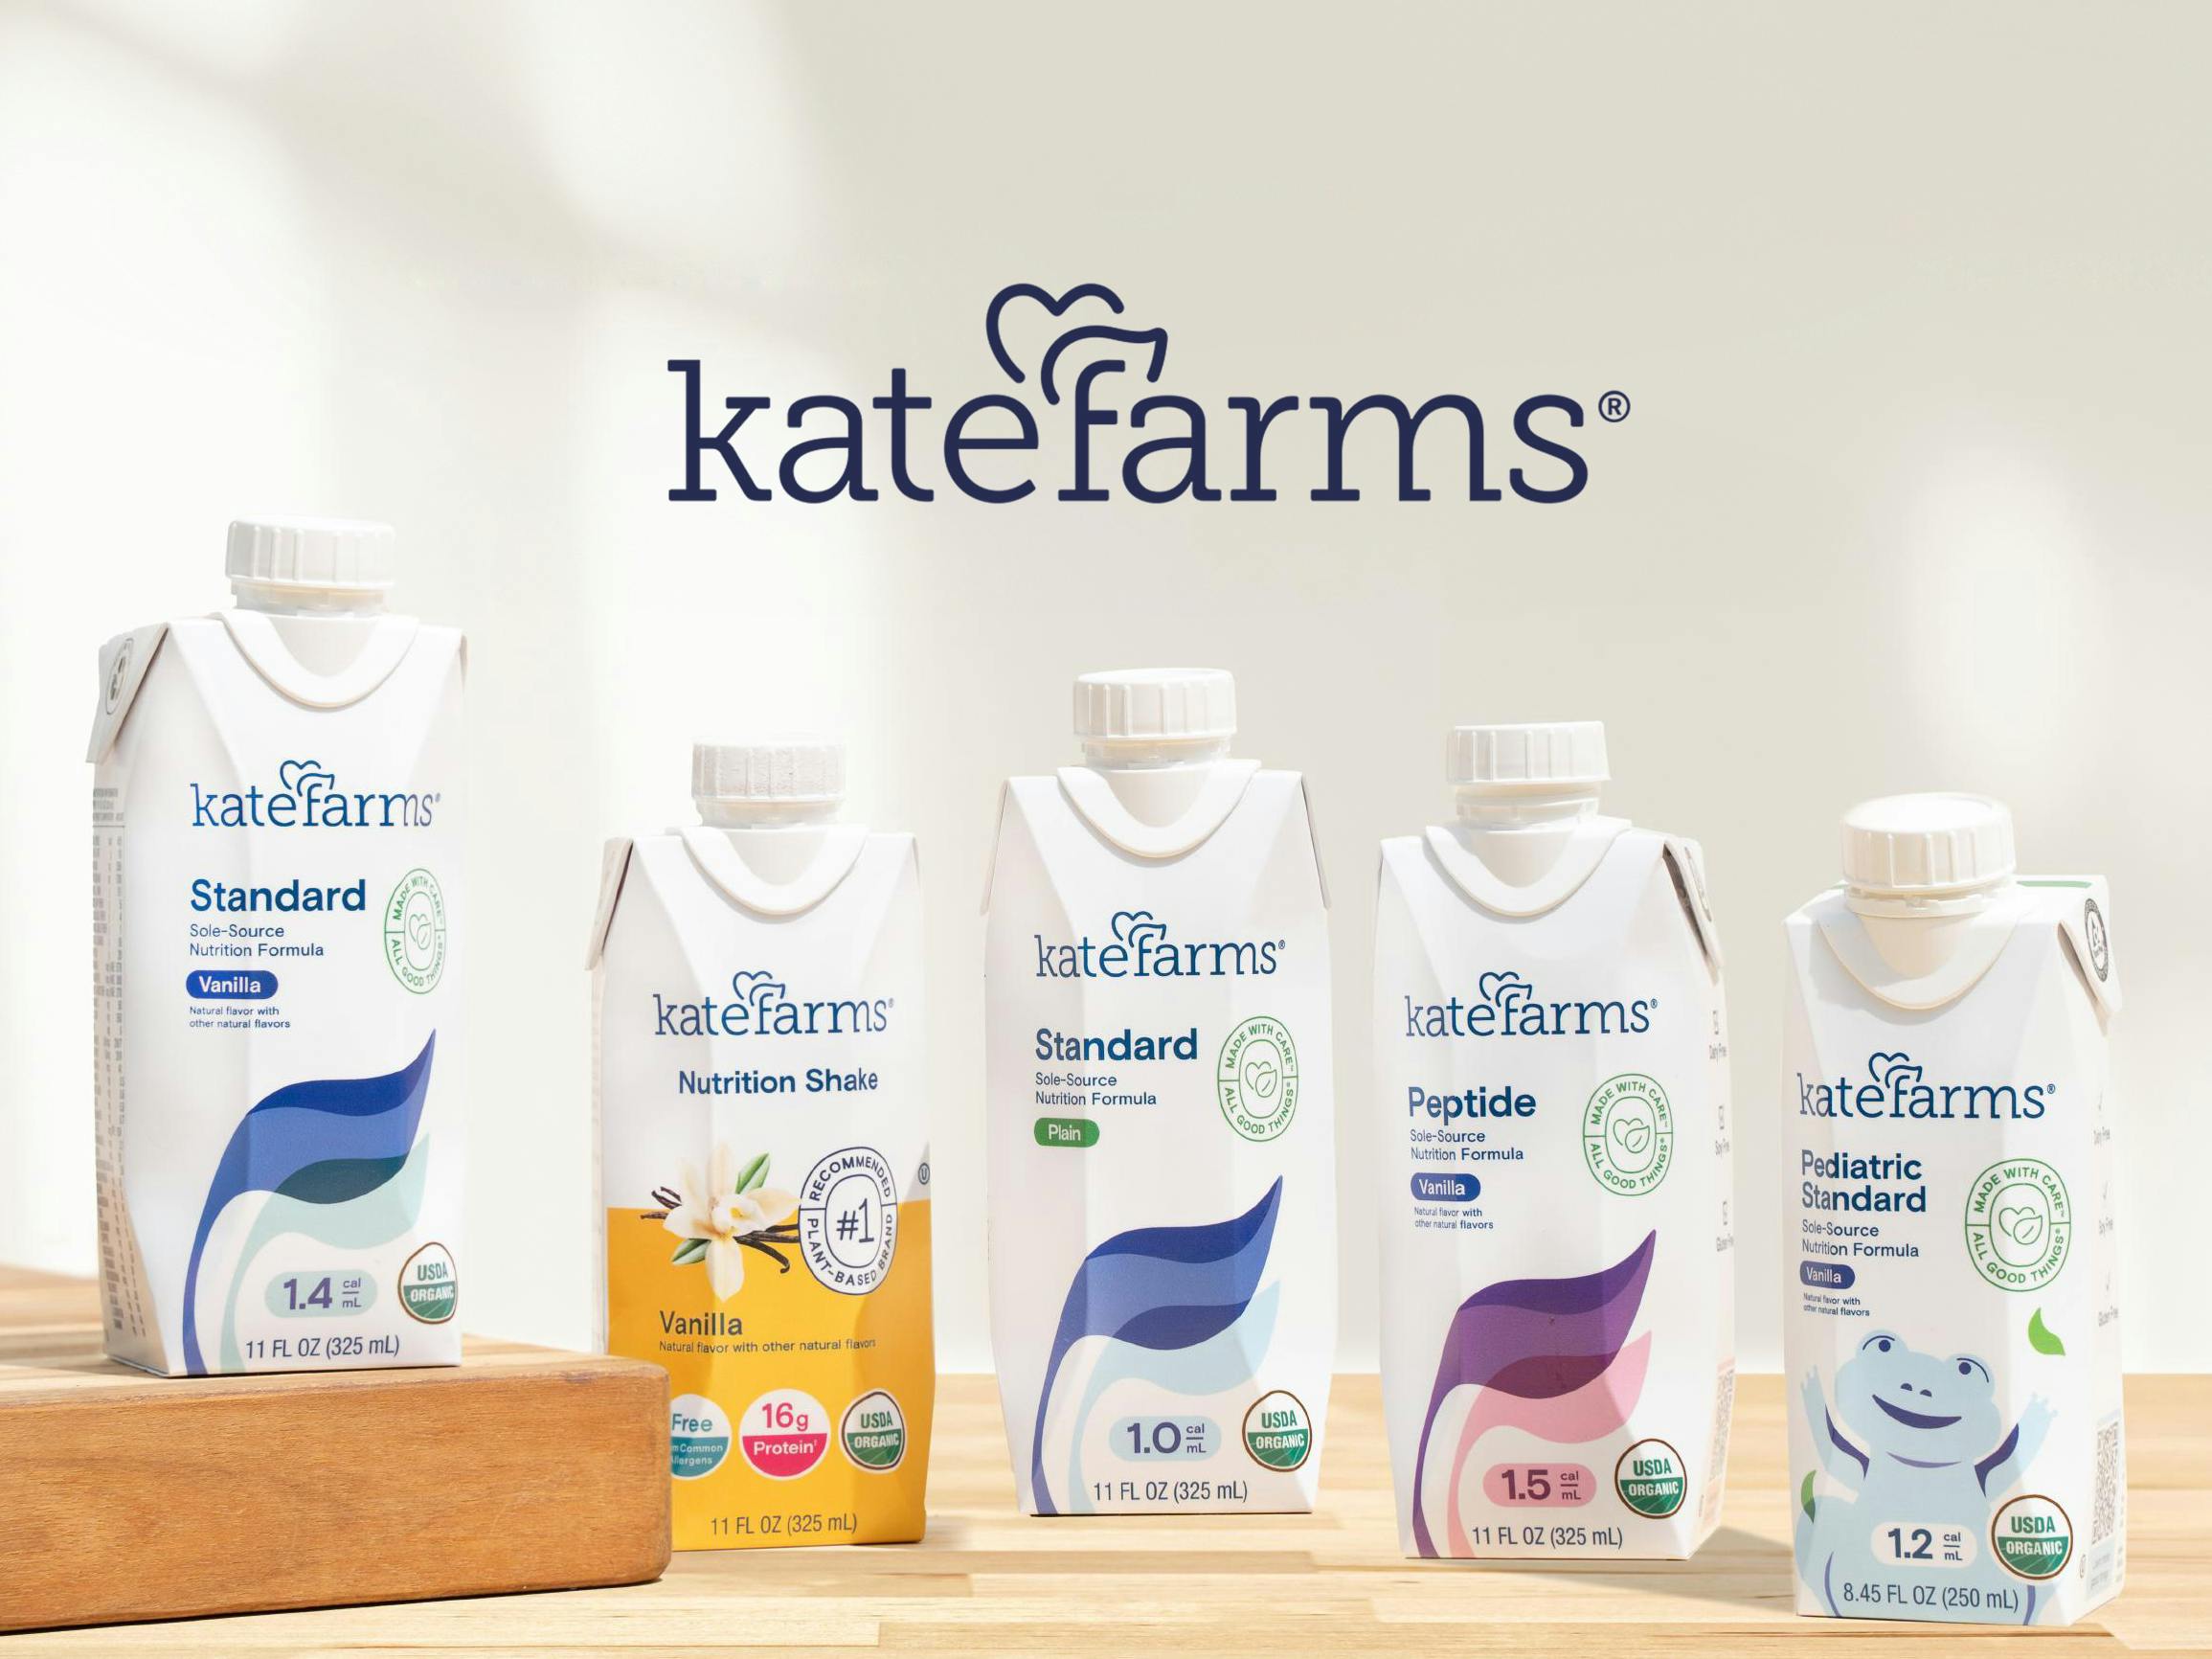 Kate Farms products.